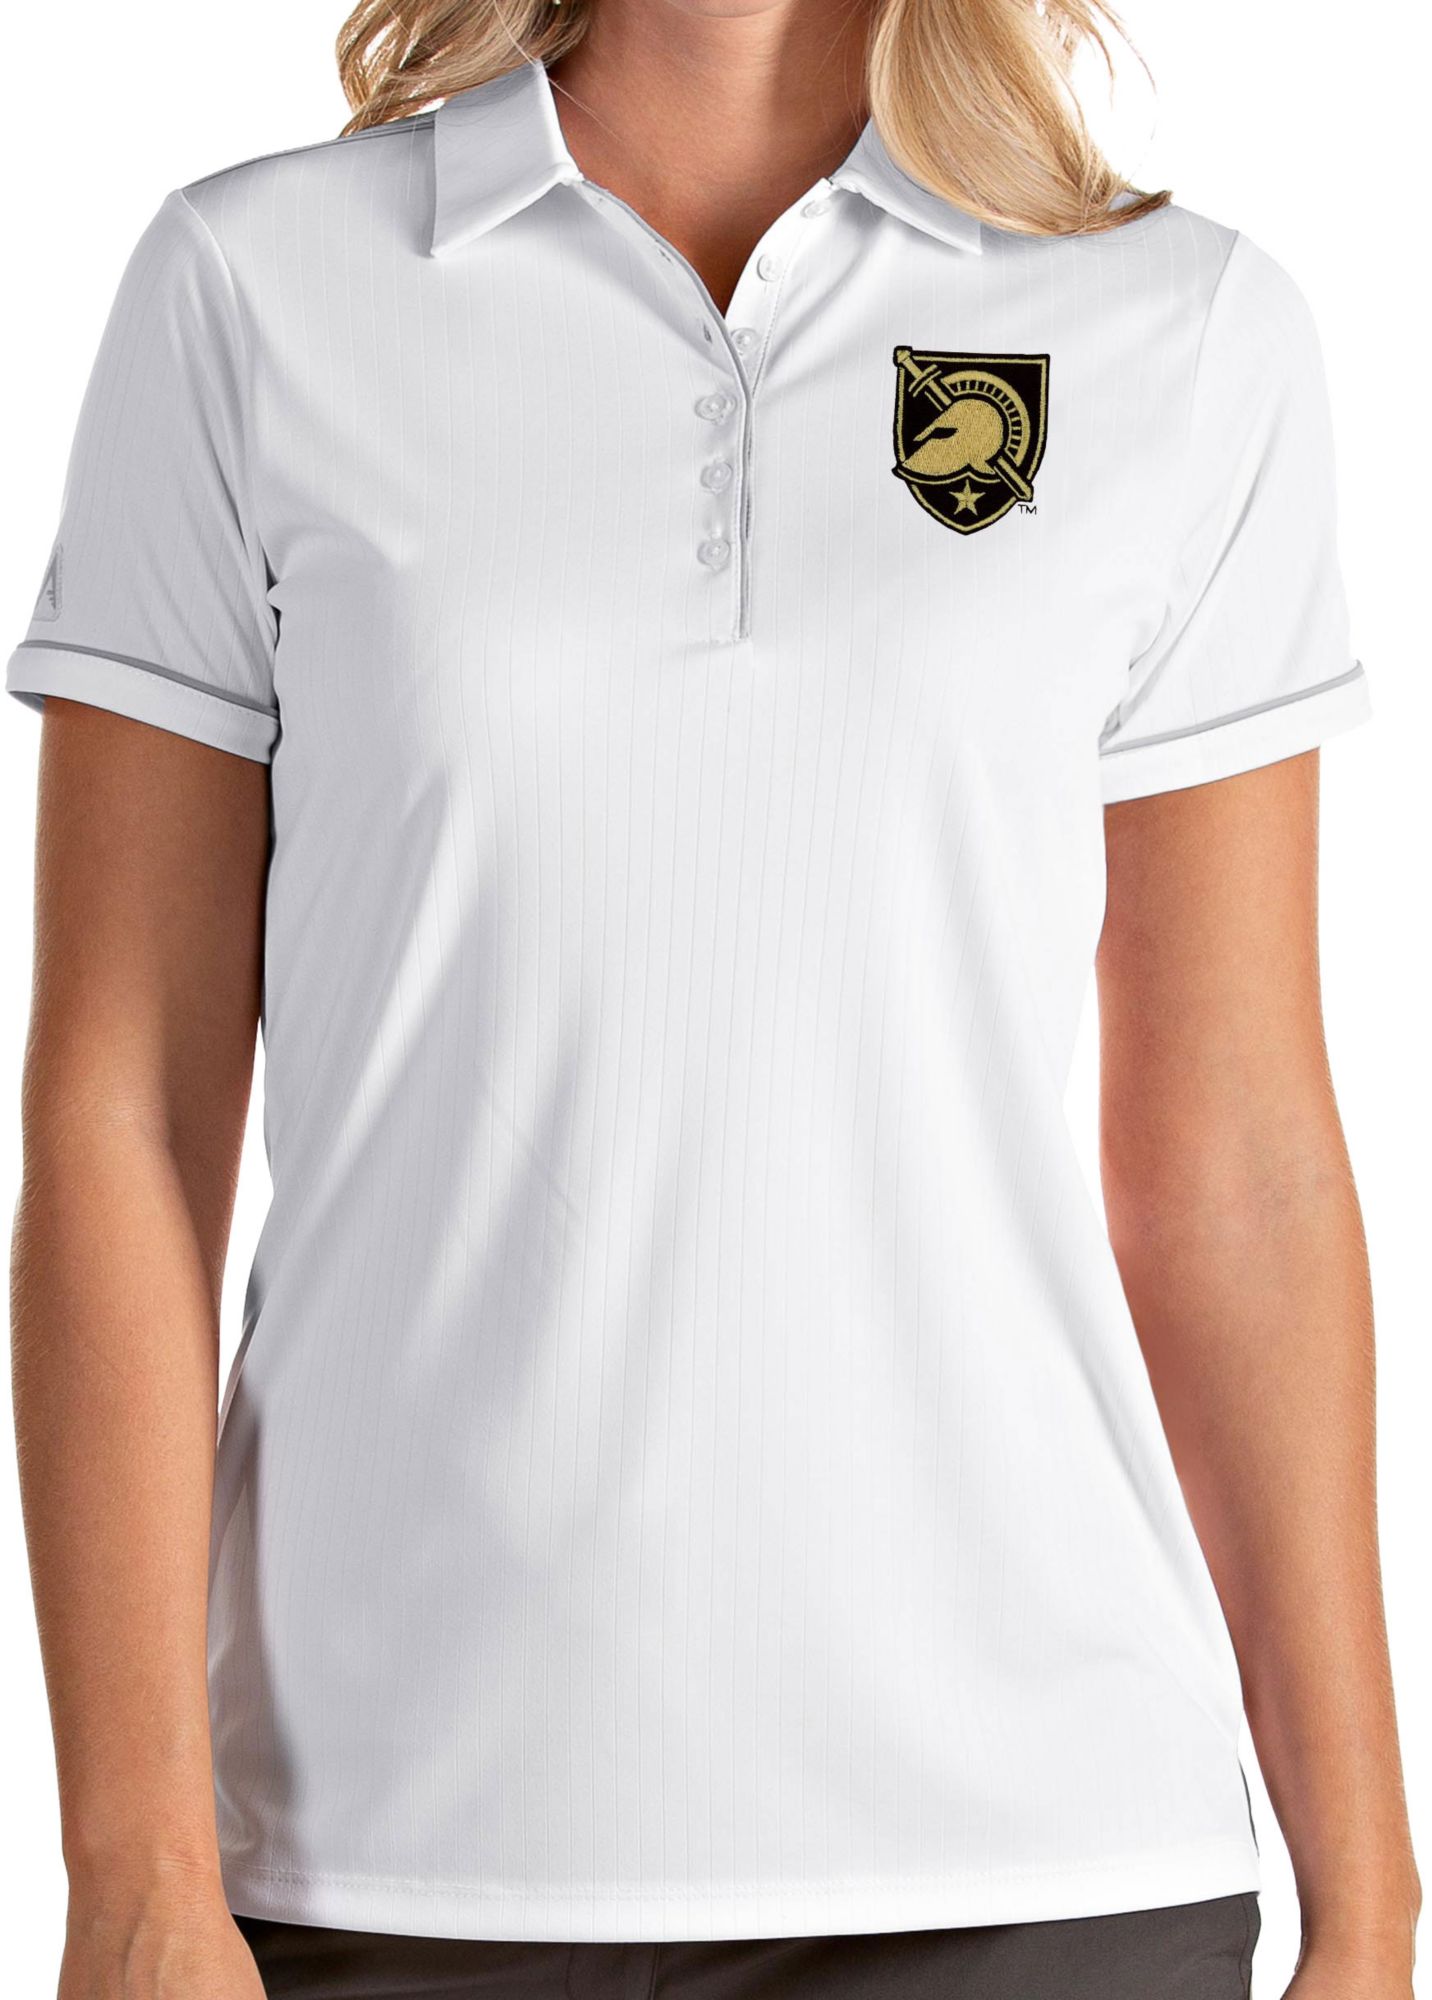 Antigua Women's Army West Point Black Knights Salute Performance White Polo